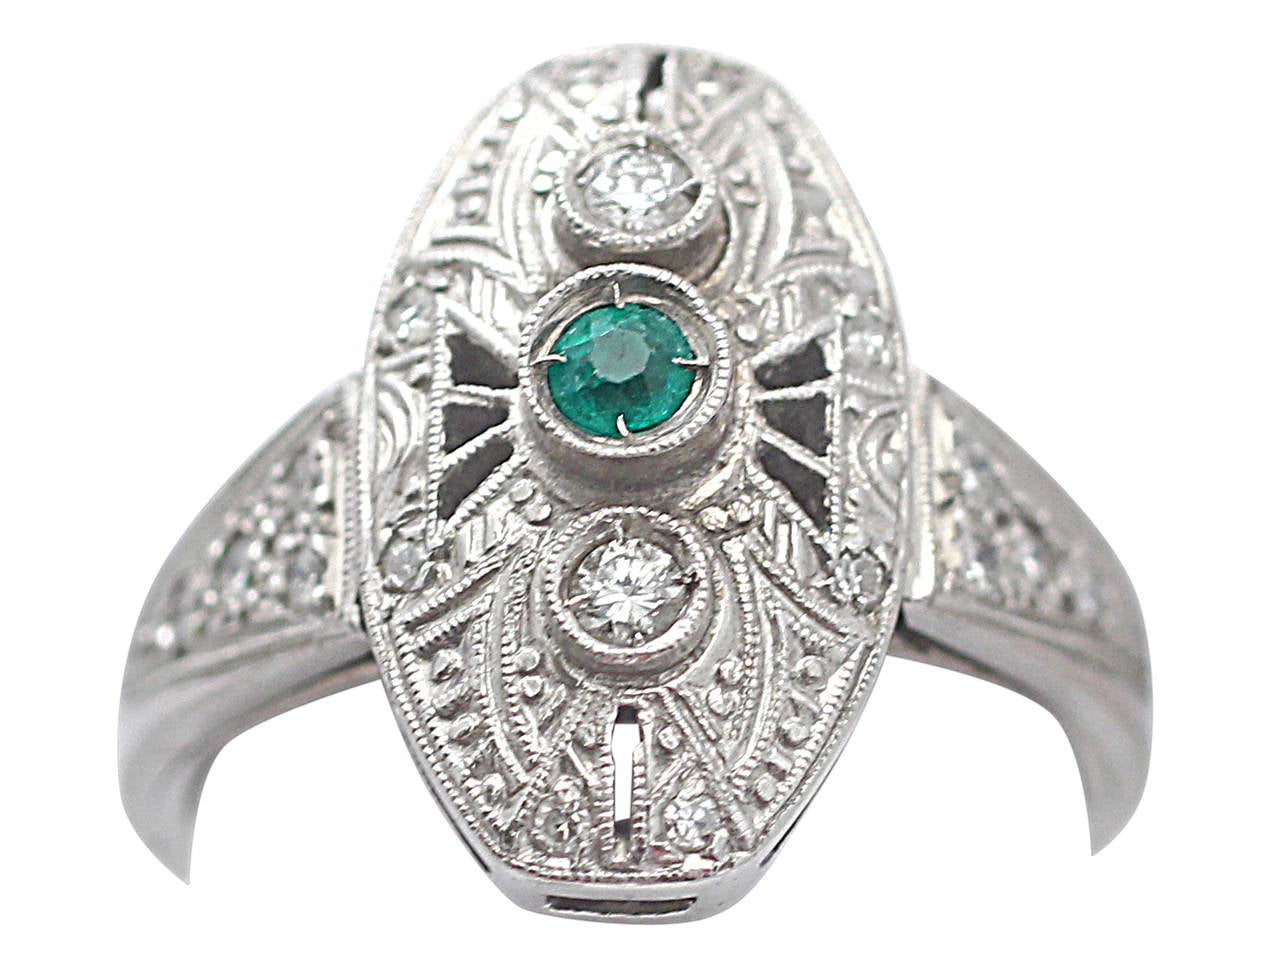 A fine vintage French emerald, 0.20 carat diamond and platinum ring in the Art Deco style; part of our vintage jewelry and estate jewelry collections

This fine vintage emerald and diamond ring has been crafted in platinum.

The ring has an